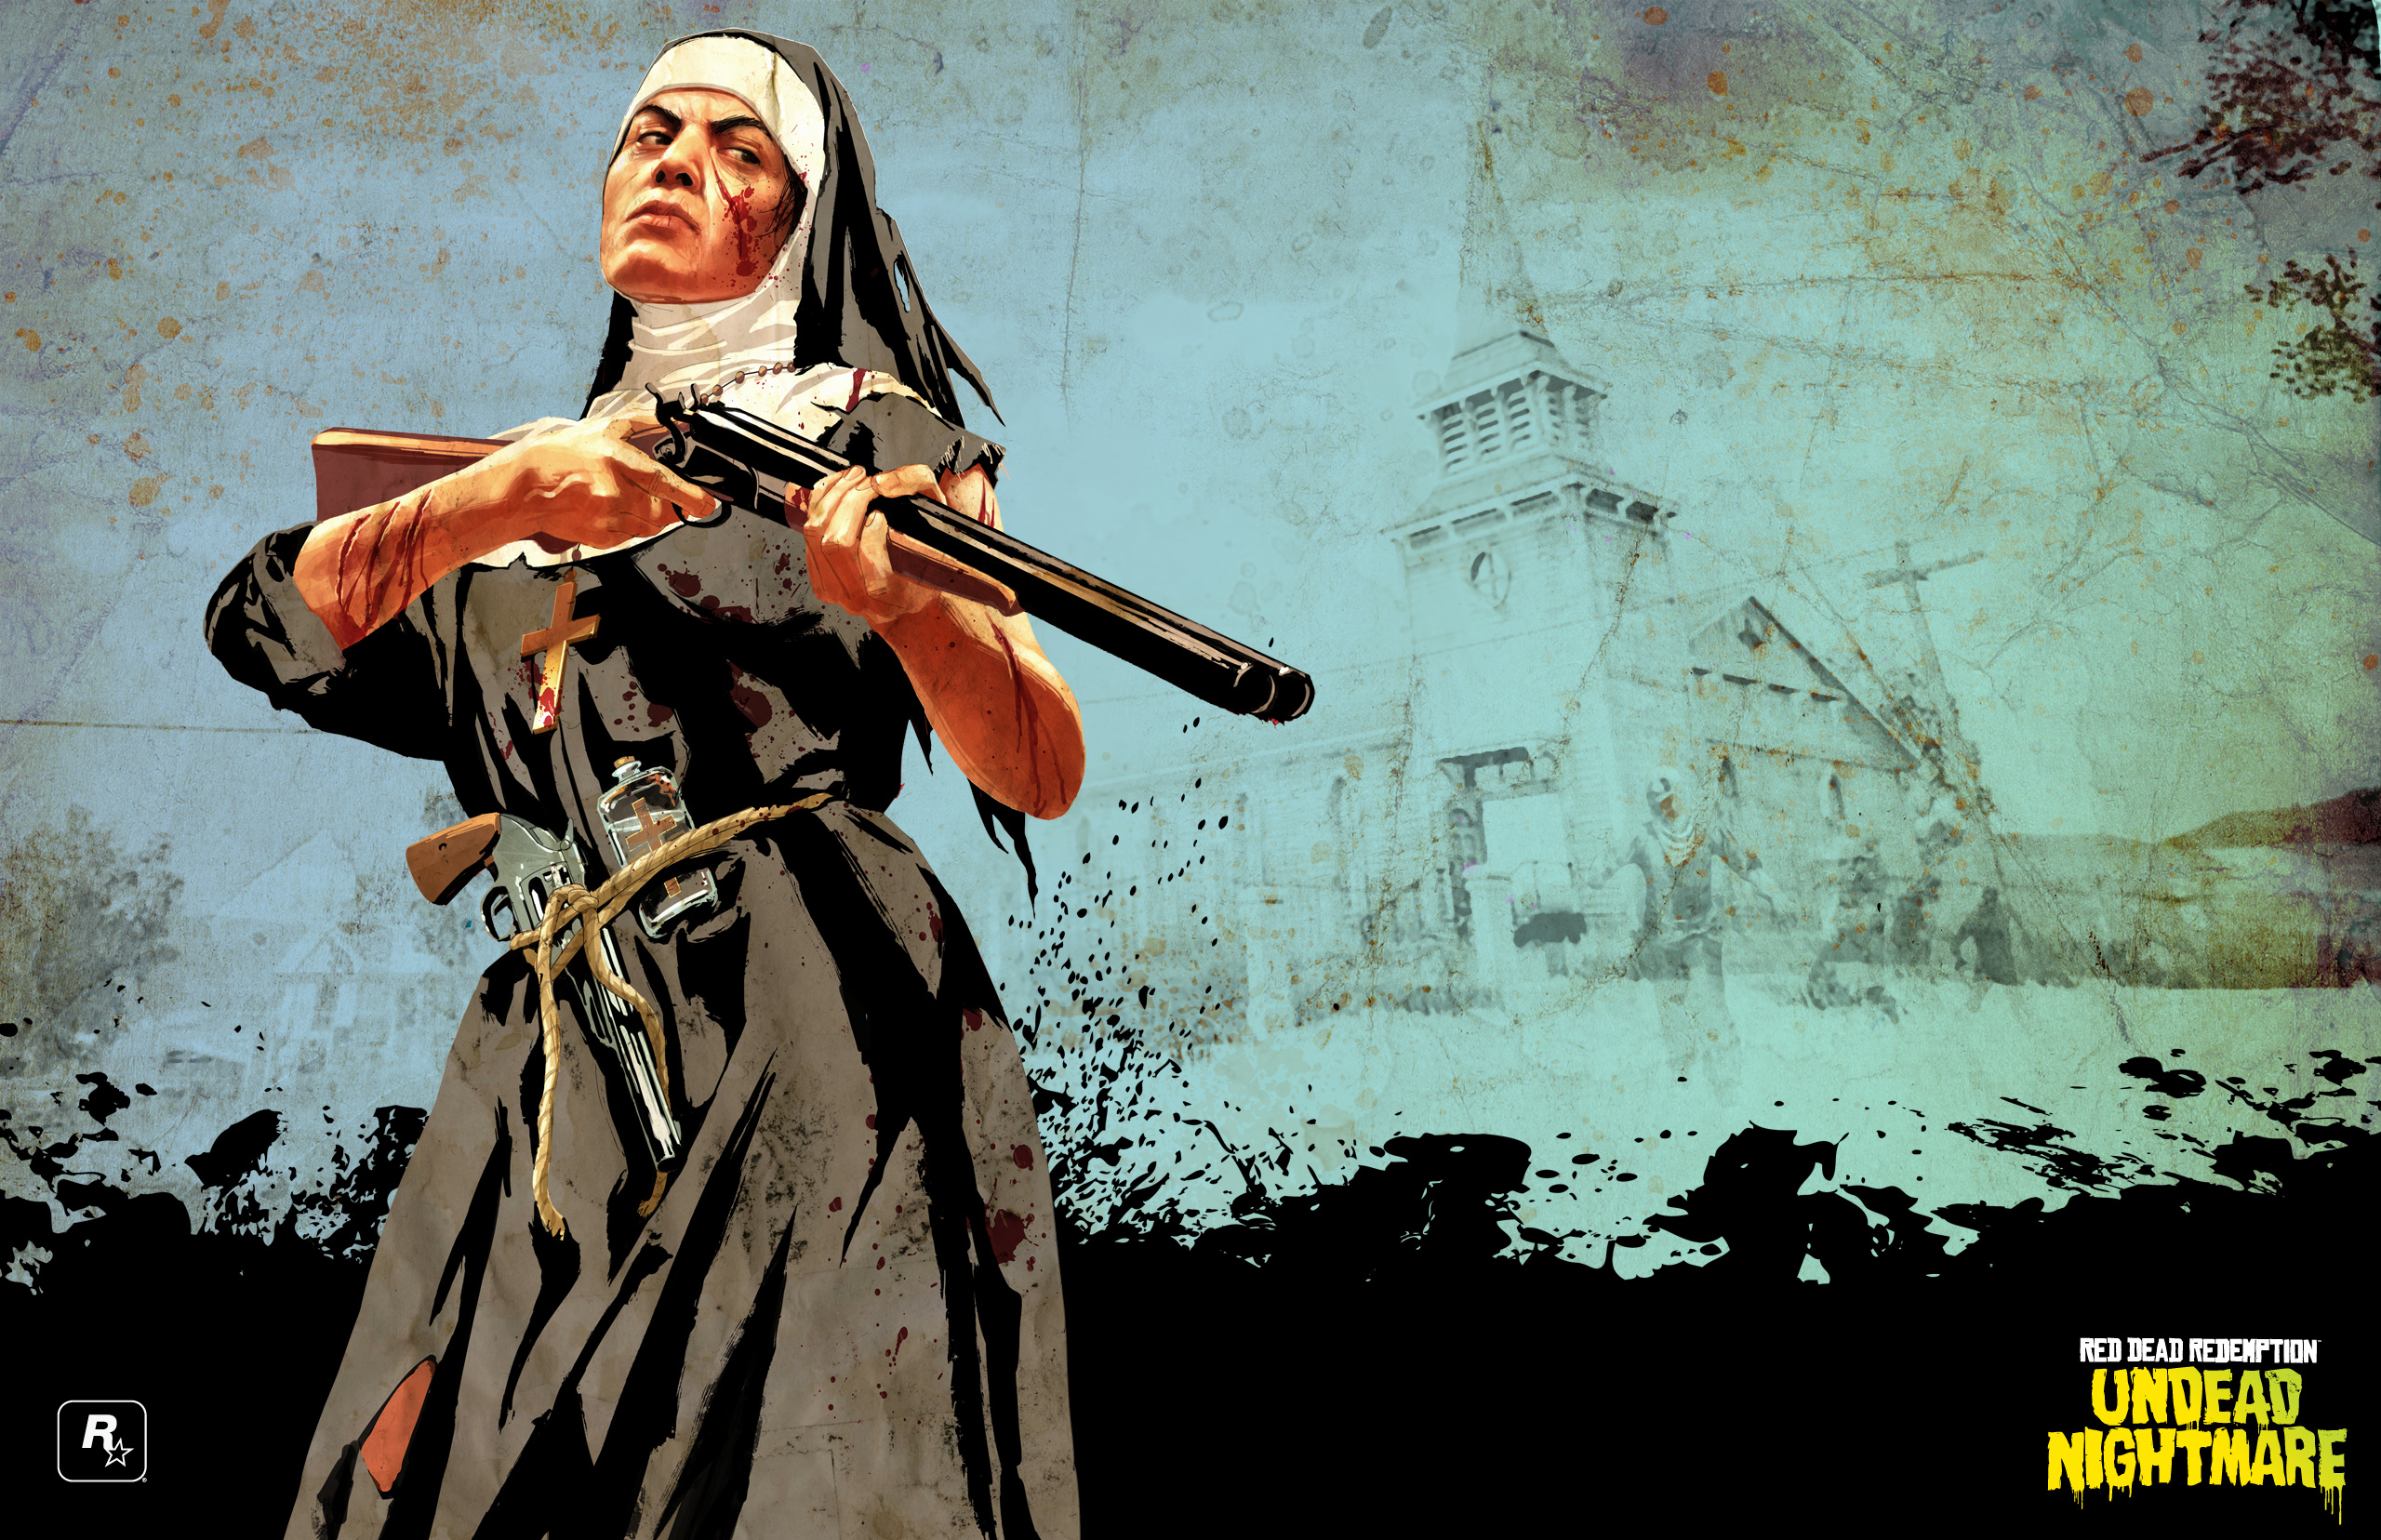 Red Dead Redemption Undead Nightmare , HD Wallpaper & Backgrounds